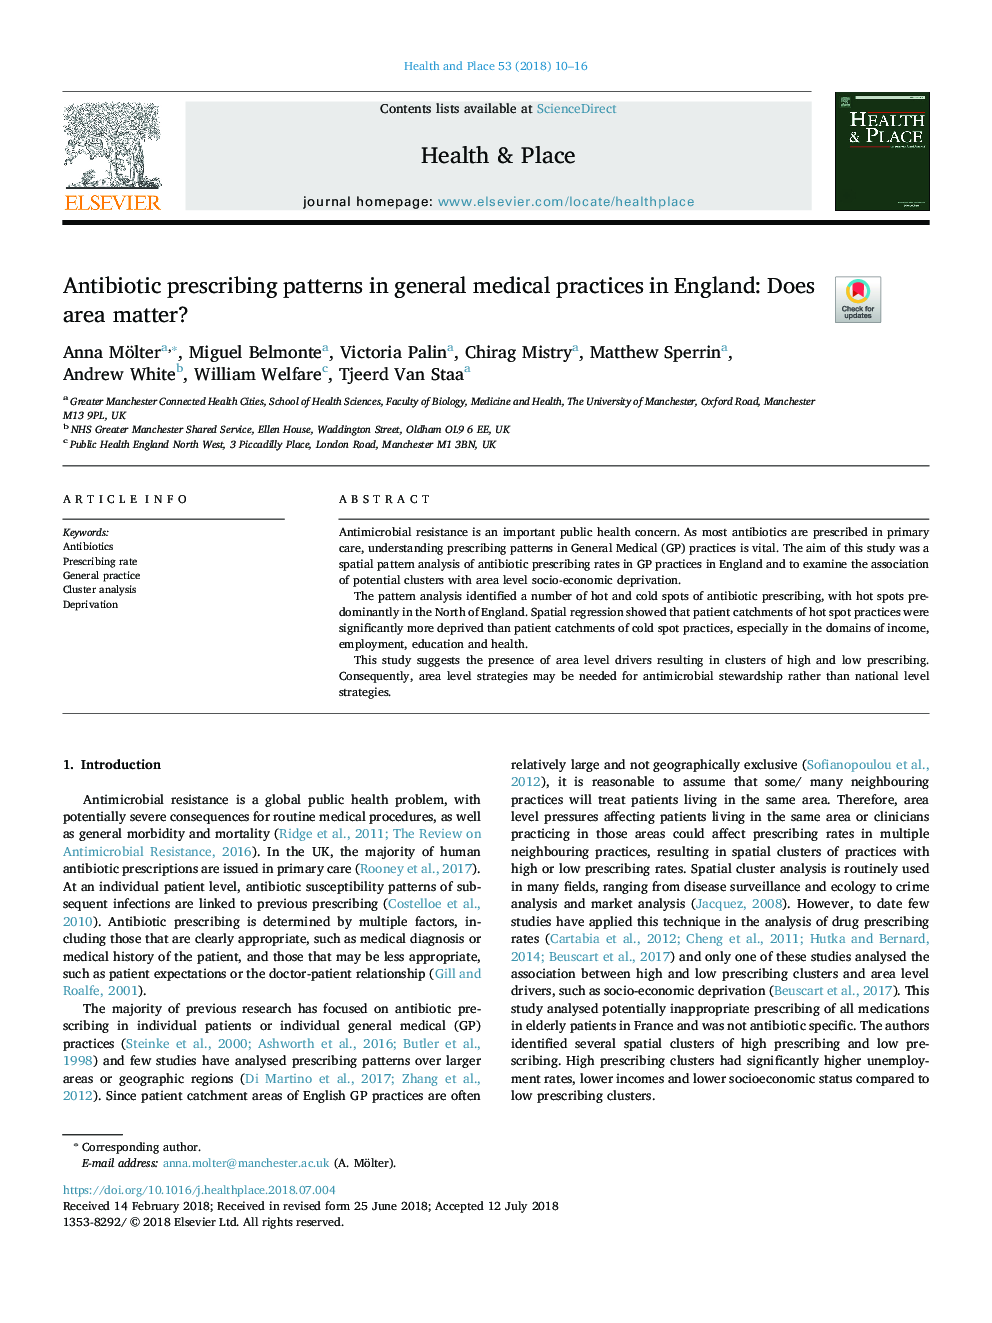 Antibiotic prescribing patterns in general medical practices in England: Does area matter?